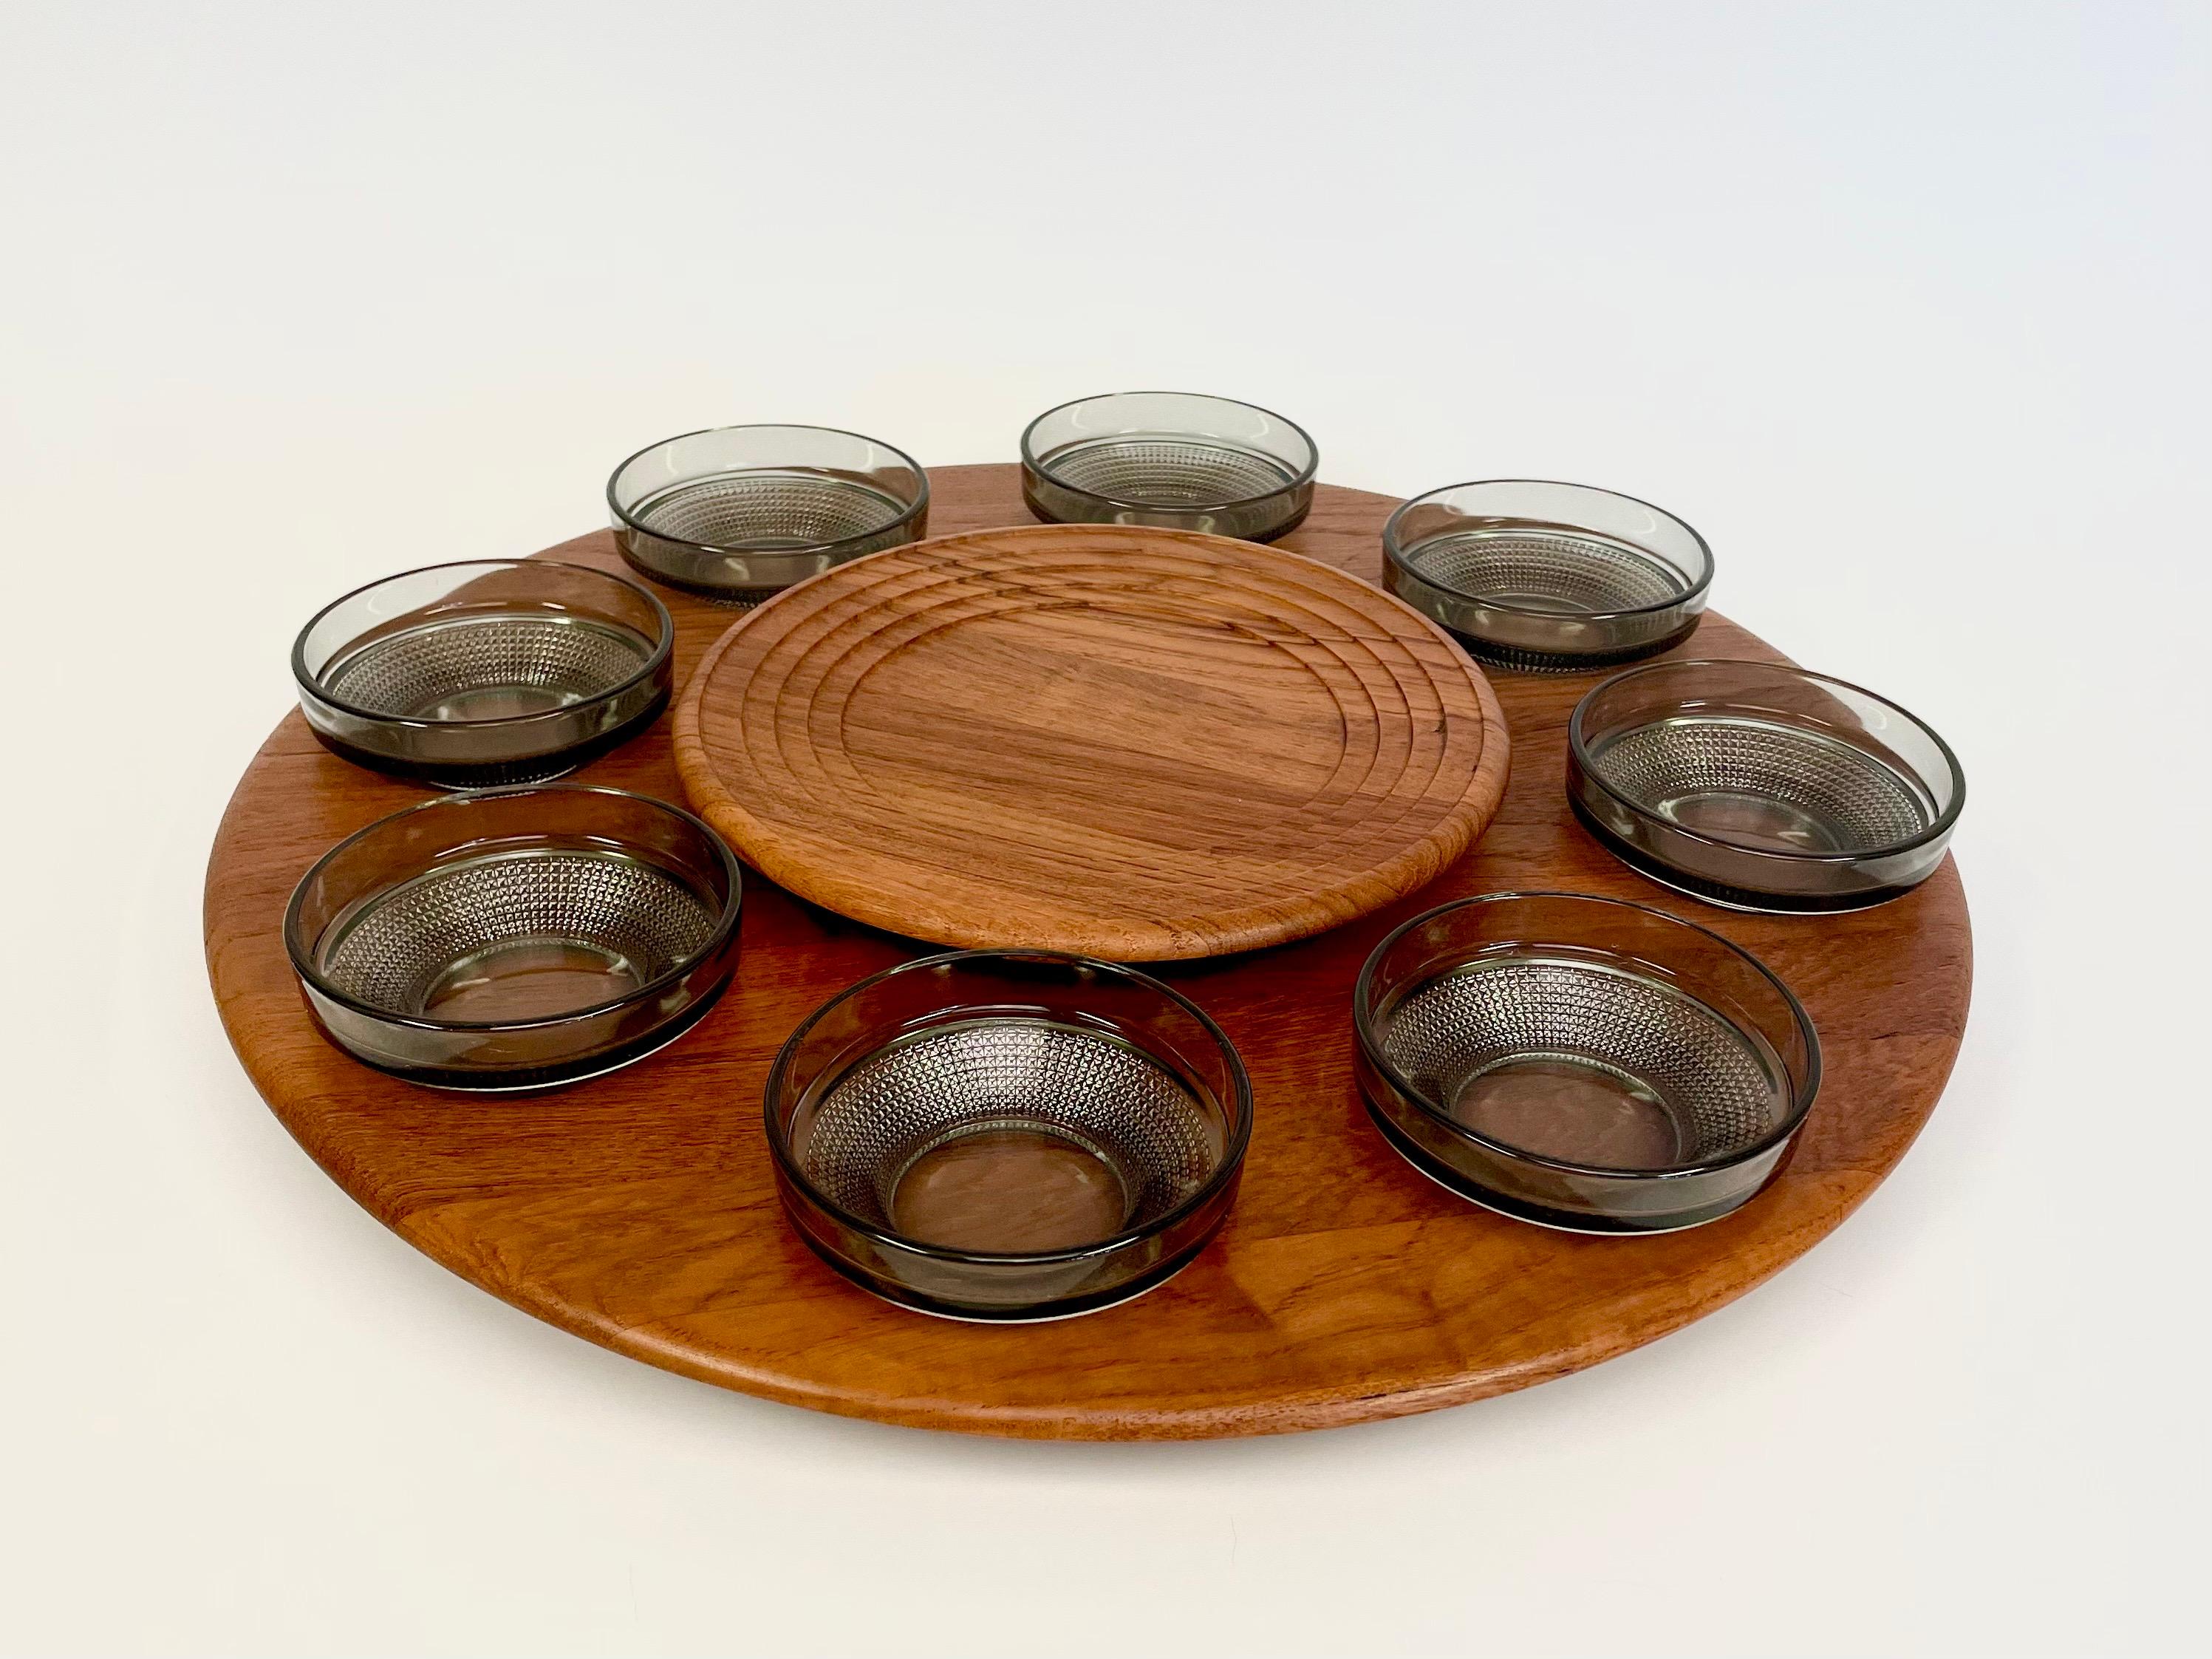 This is the 1960s Danish rare 51 cm wide teakwood “Lazy Susan” serving plate by Digsmed.

It comes with the not so often occurring diameter 51 cm. This model has a well-proportioned 25 cm wide center plate. Around it spins a ball-bearing carousel